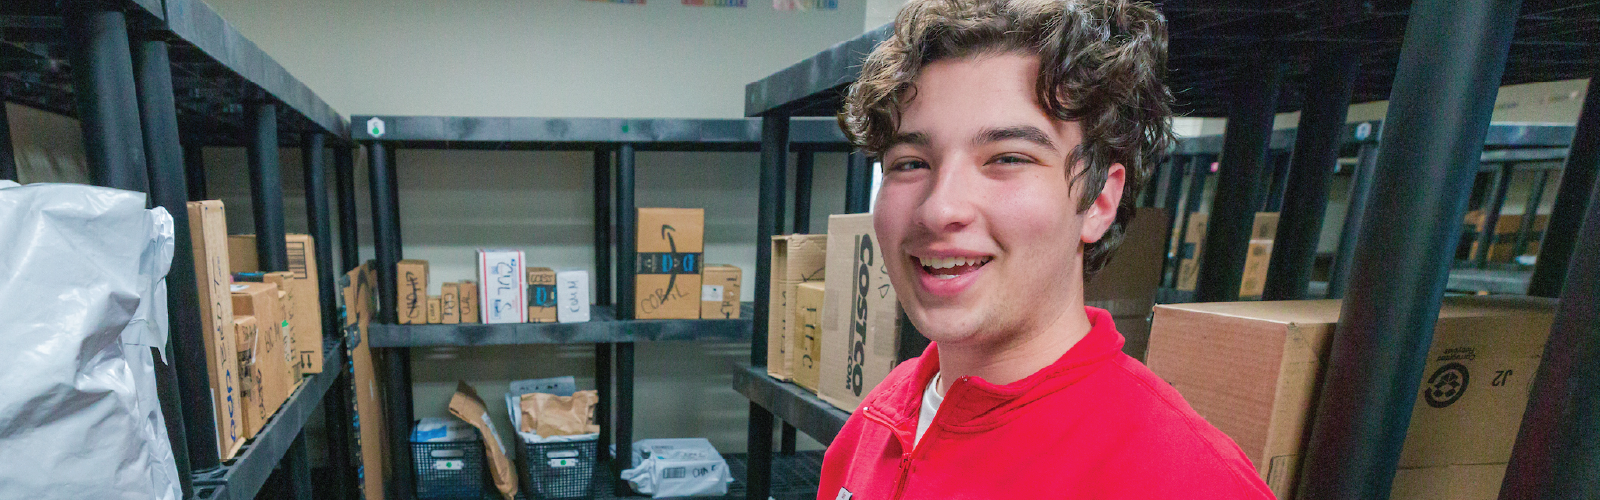 A Housing staff member smiles for a photo among packages on shelves